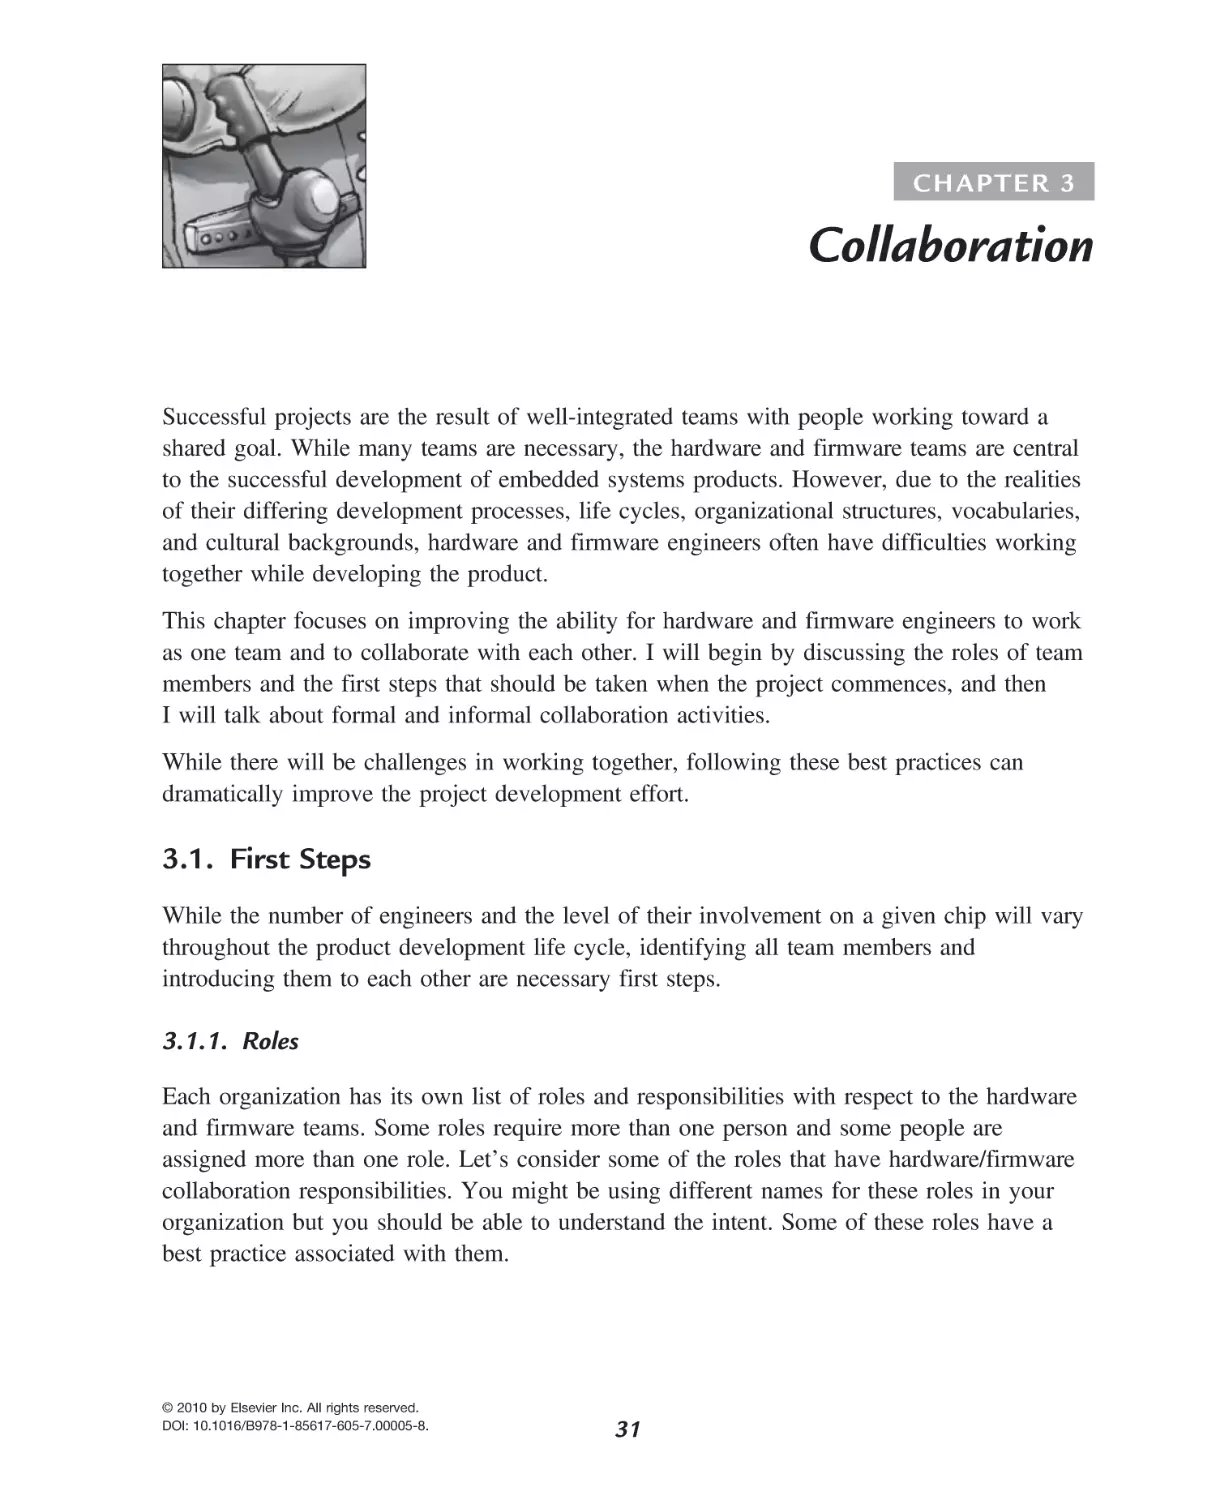 3 Collaboration
First Steps
Roles